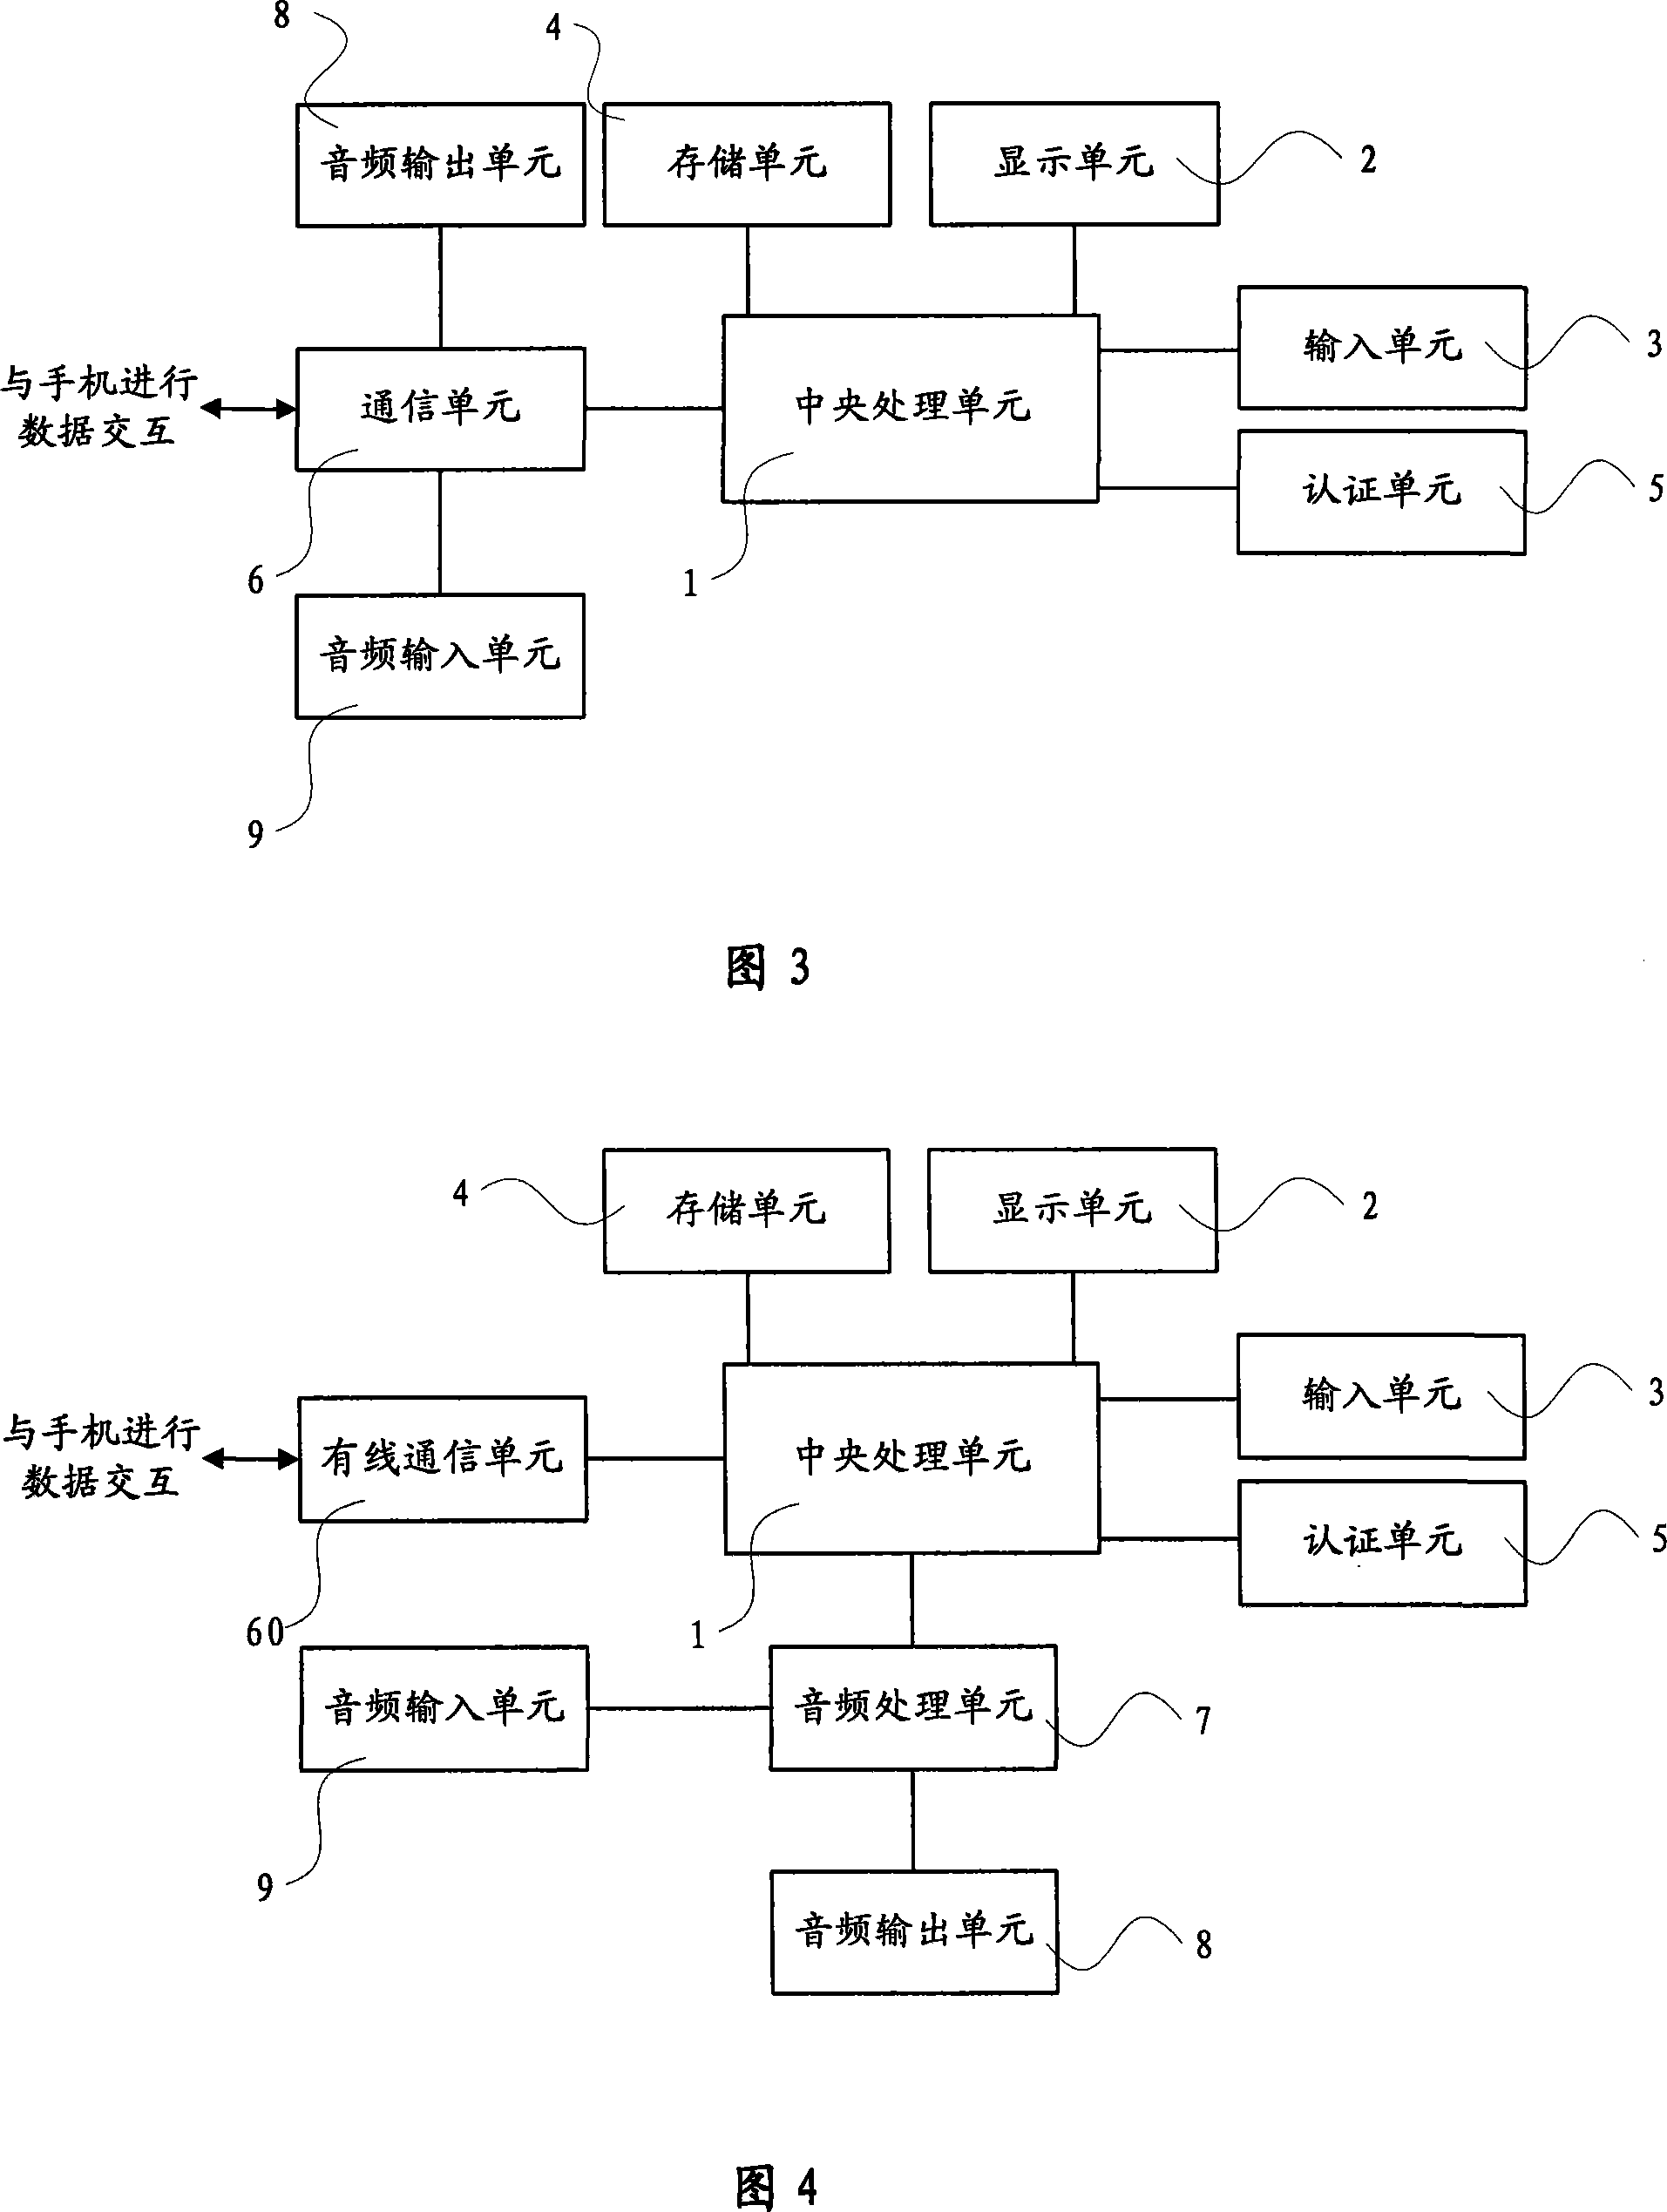 Apparatus and method for monitoring mobile phone state